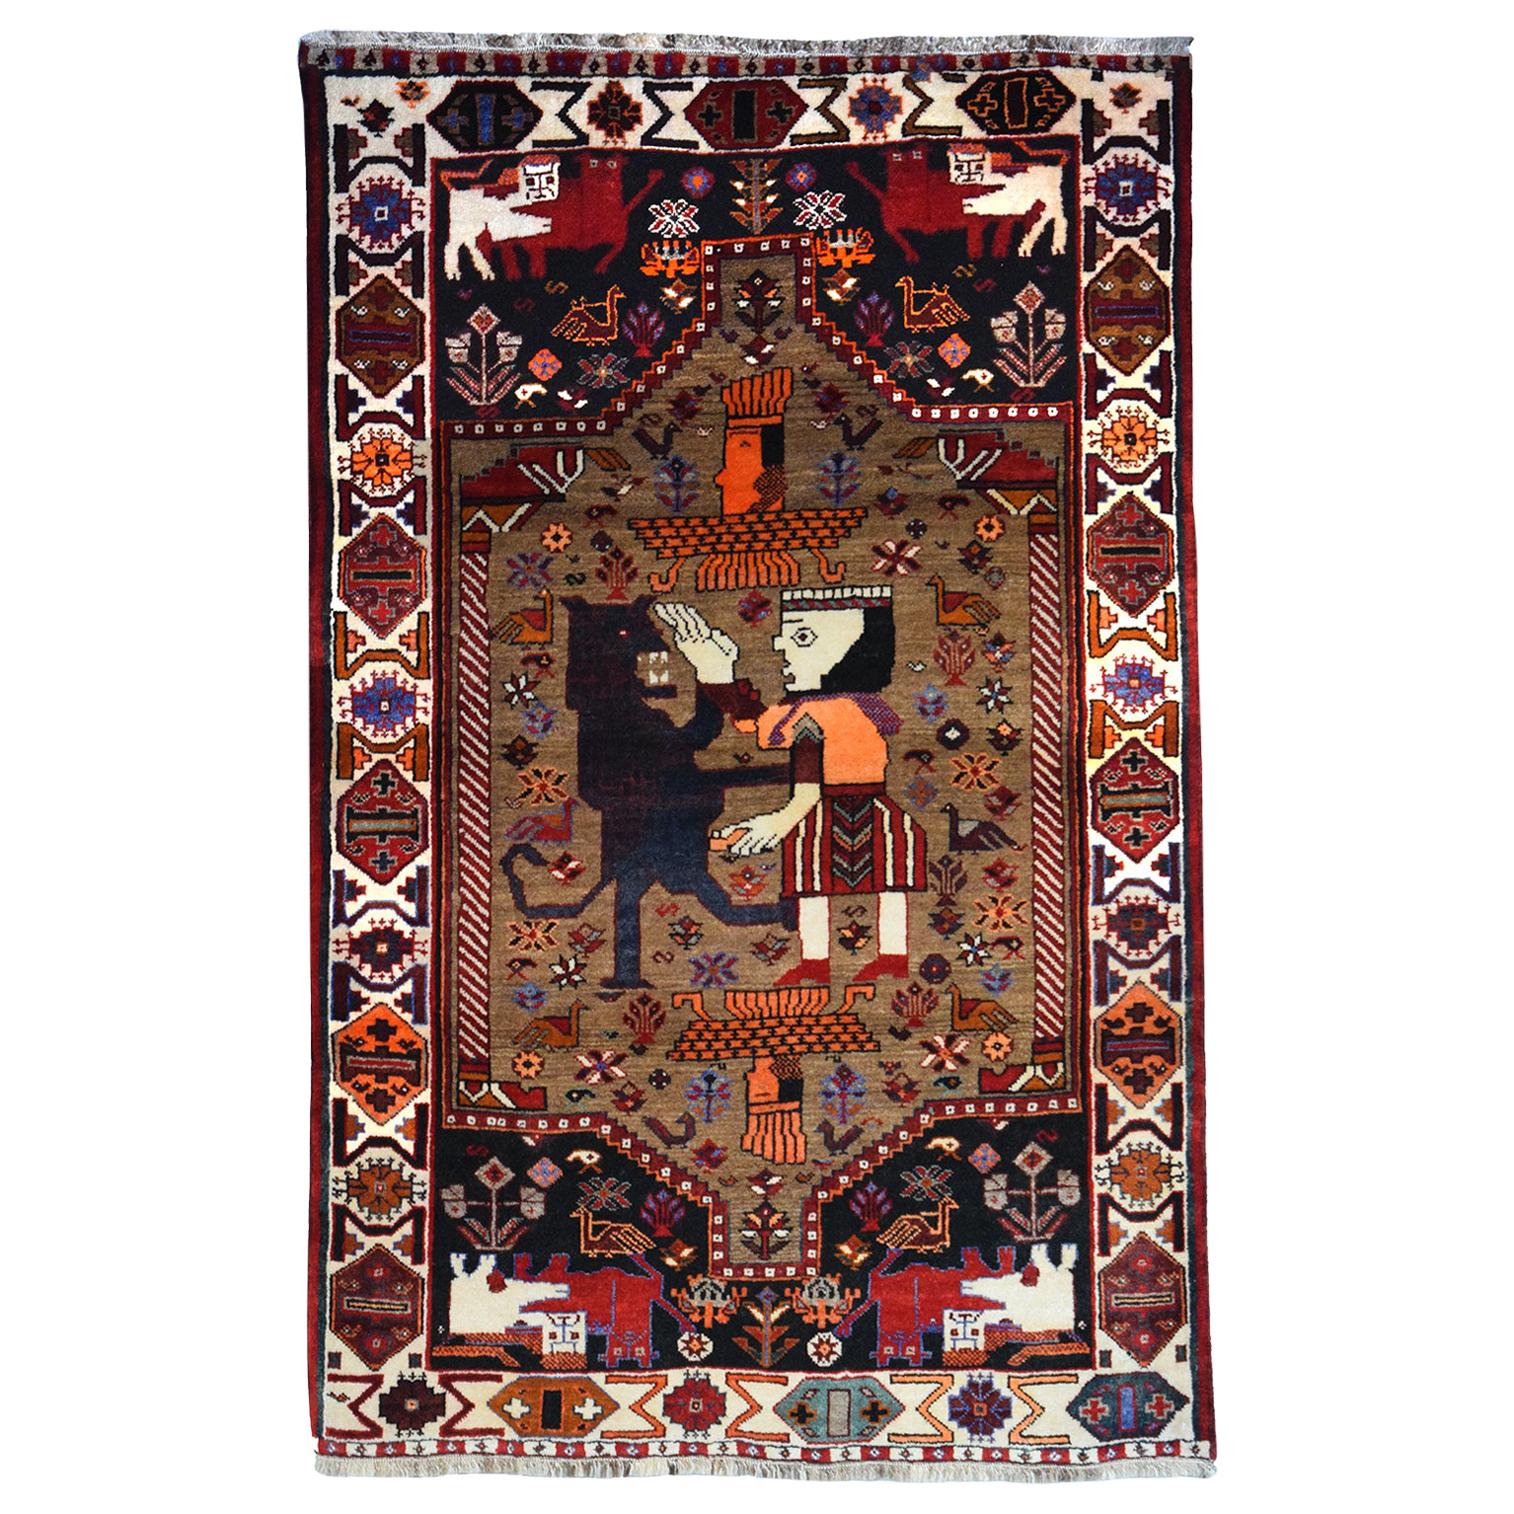 Antique 1940s Persian Qashqai Rug, King Bahram and the Lion, 3' x 5' For Sale